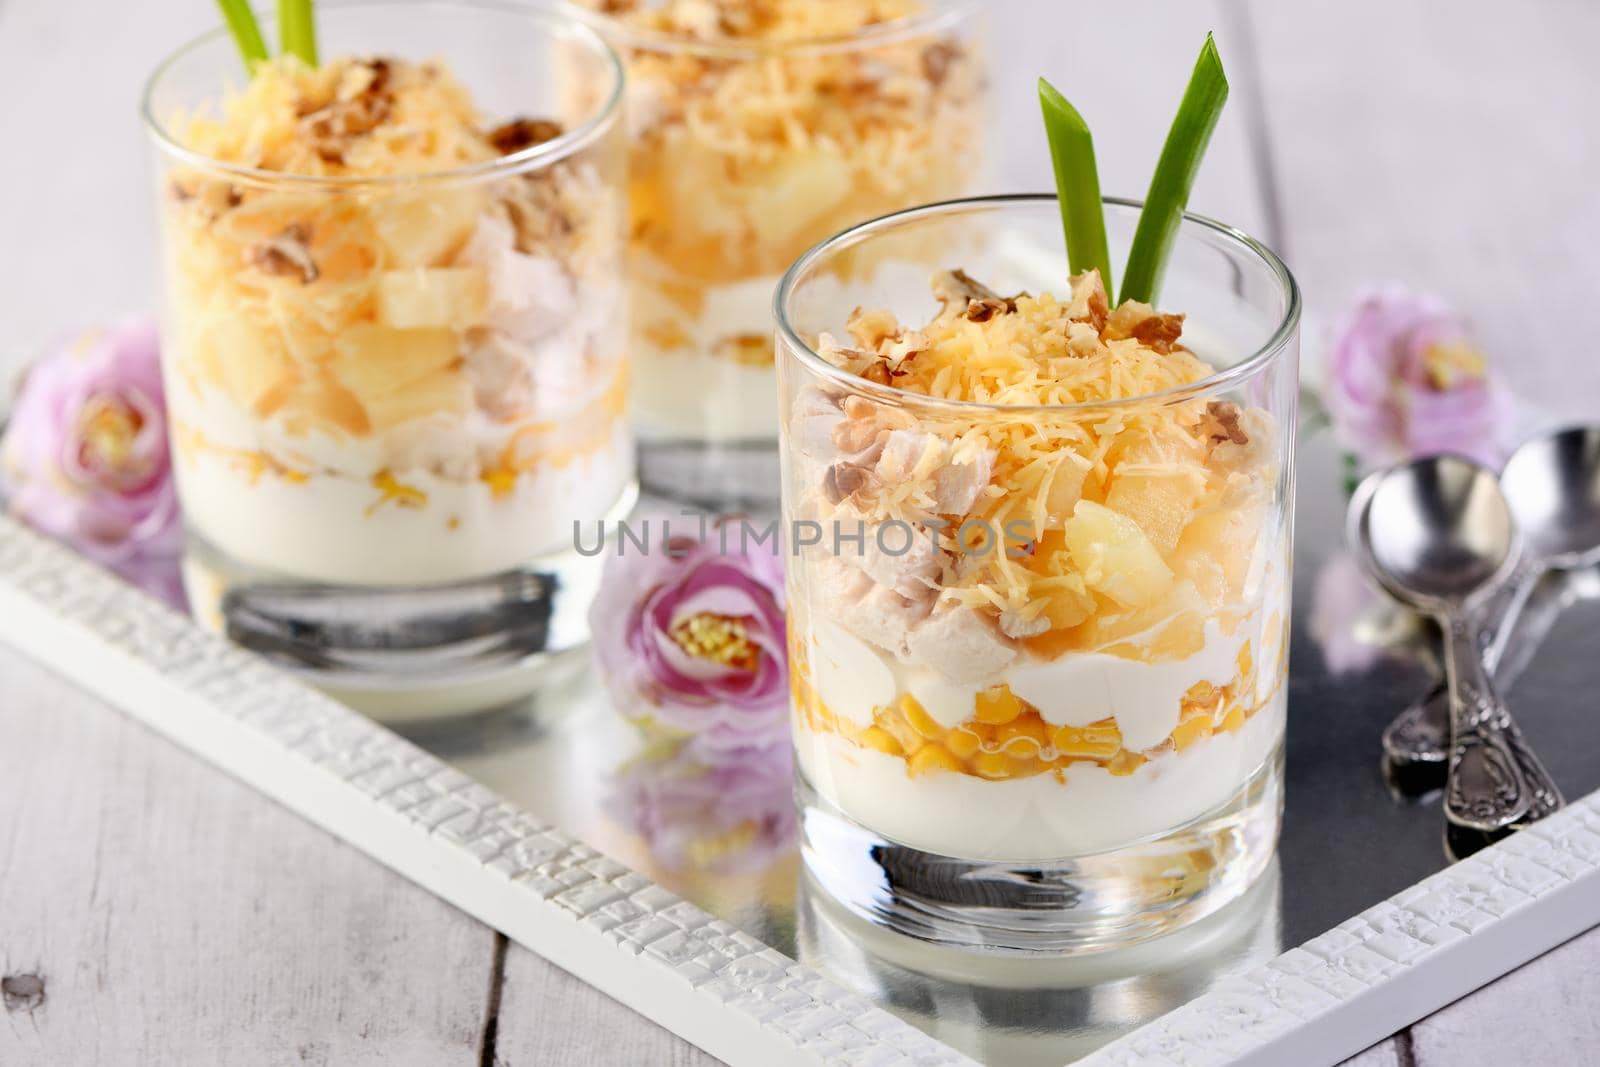 Chicken salad in a glass by Apolonia